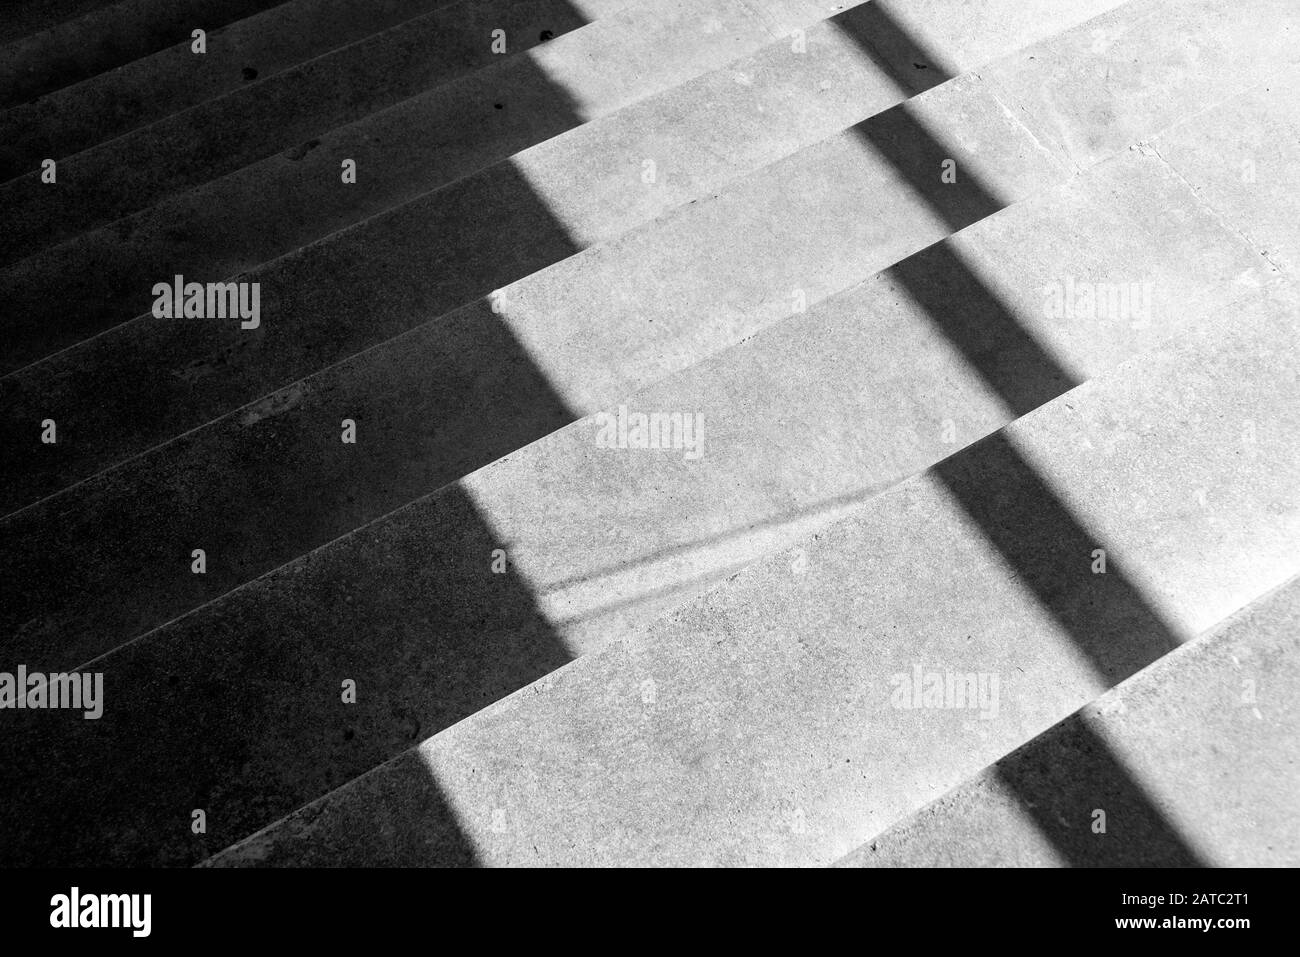 Concrete steps and shadows pattern, abstract in black & white of shadows on concrete steps. Stock Photo